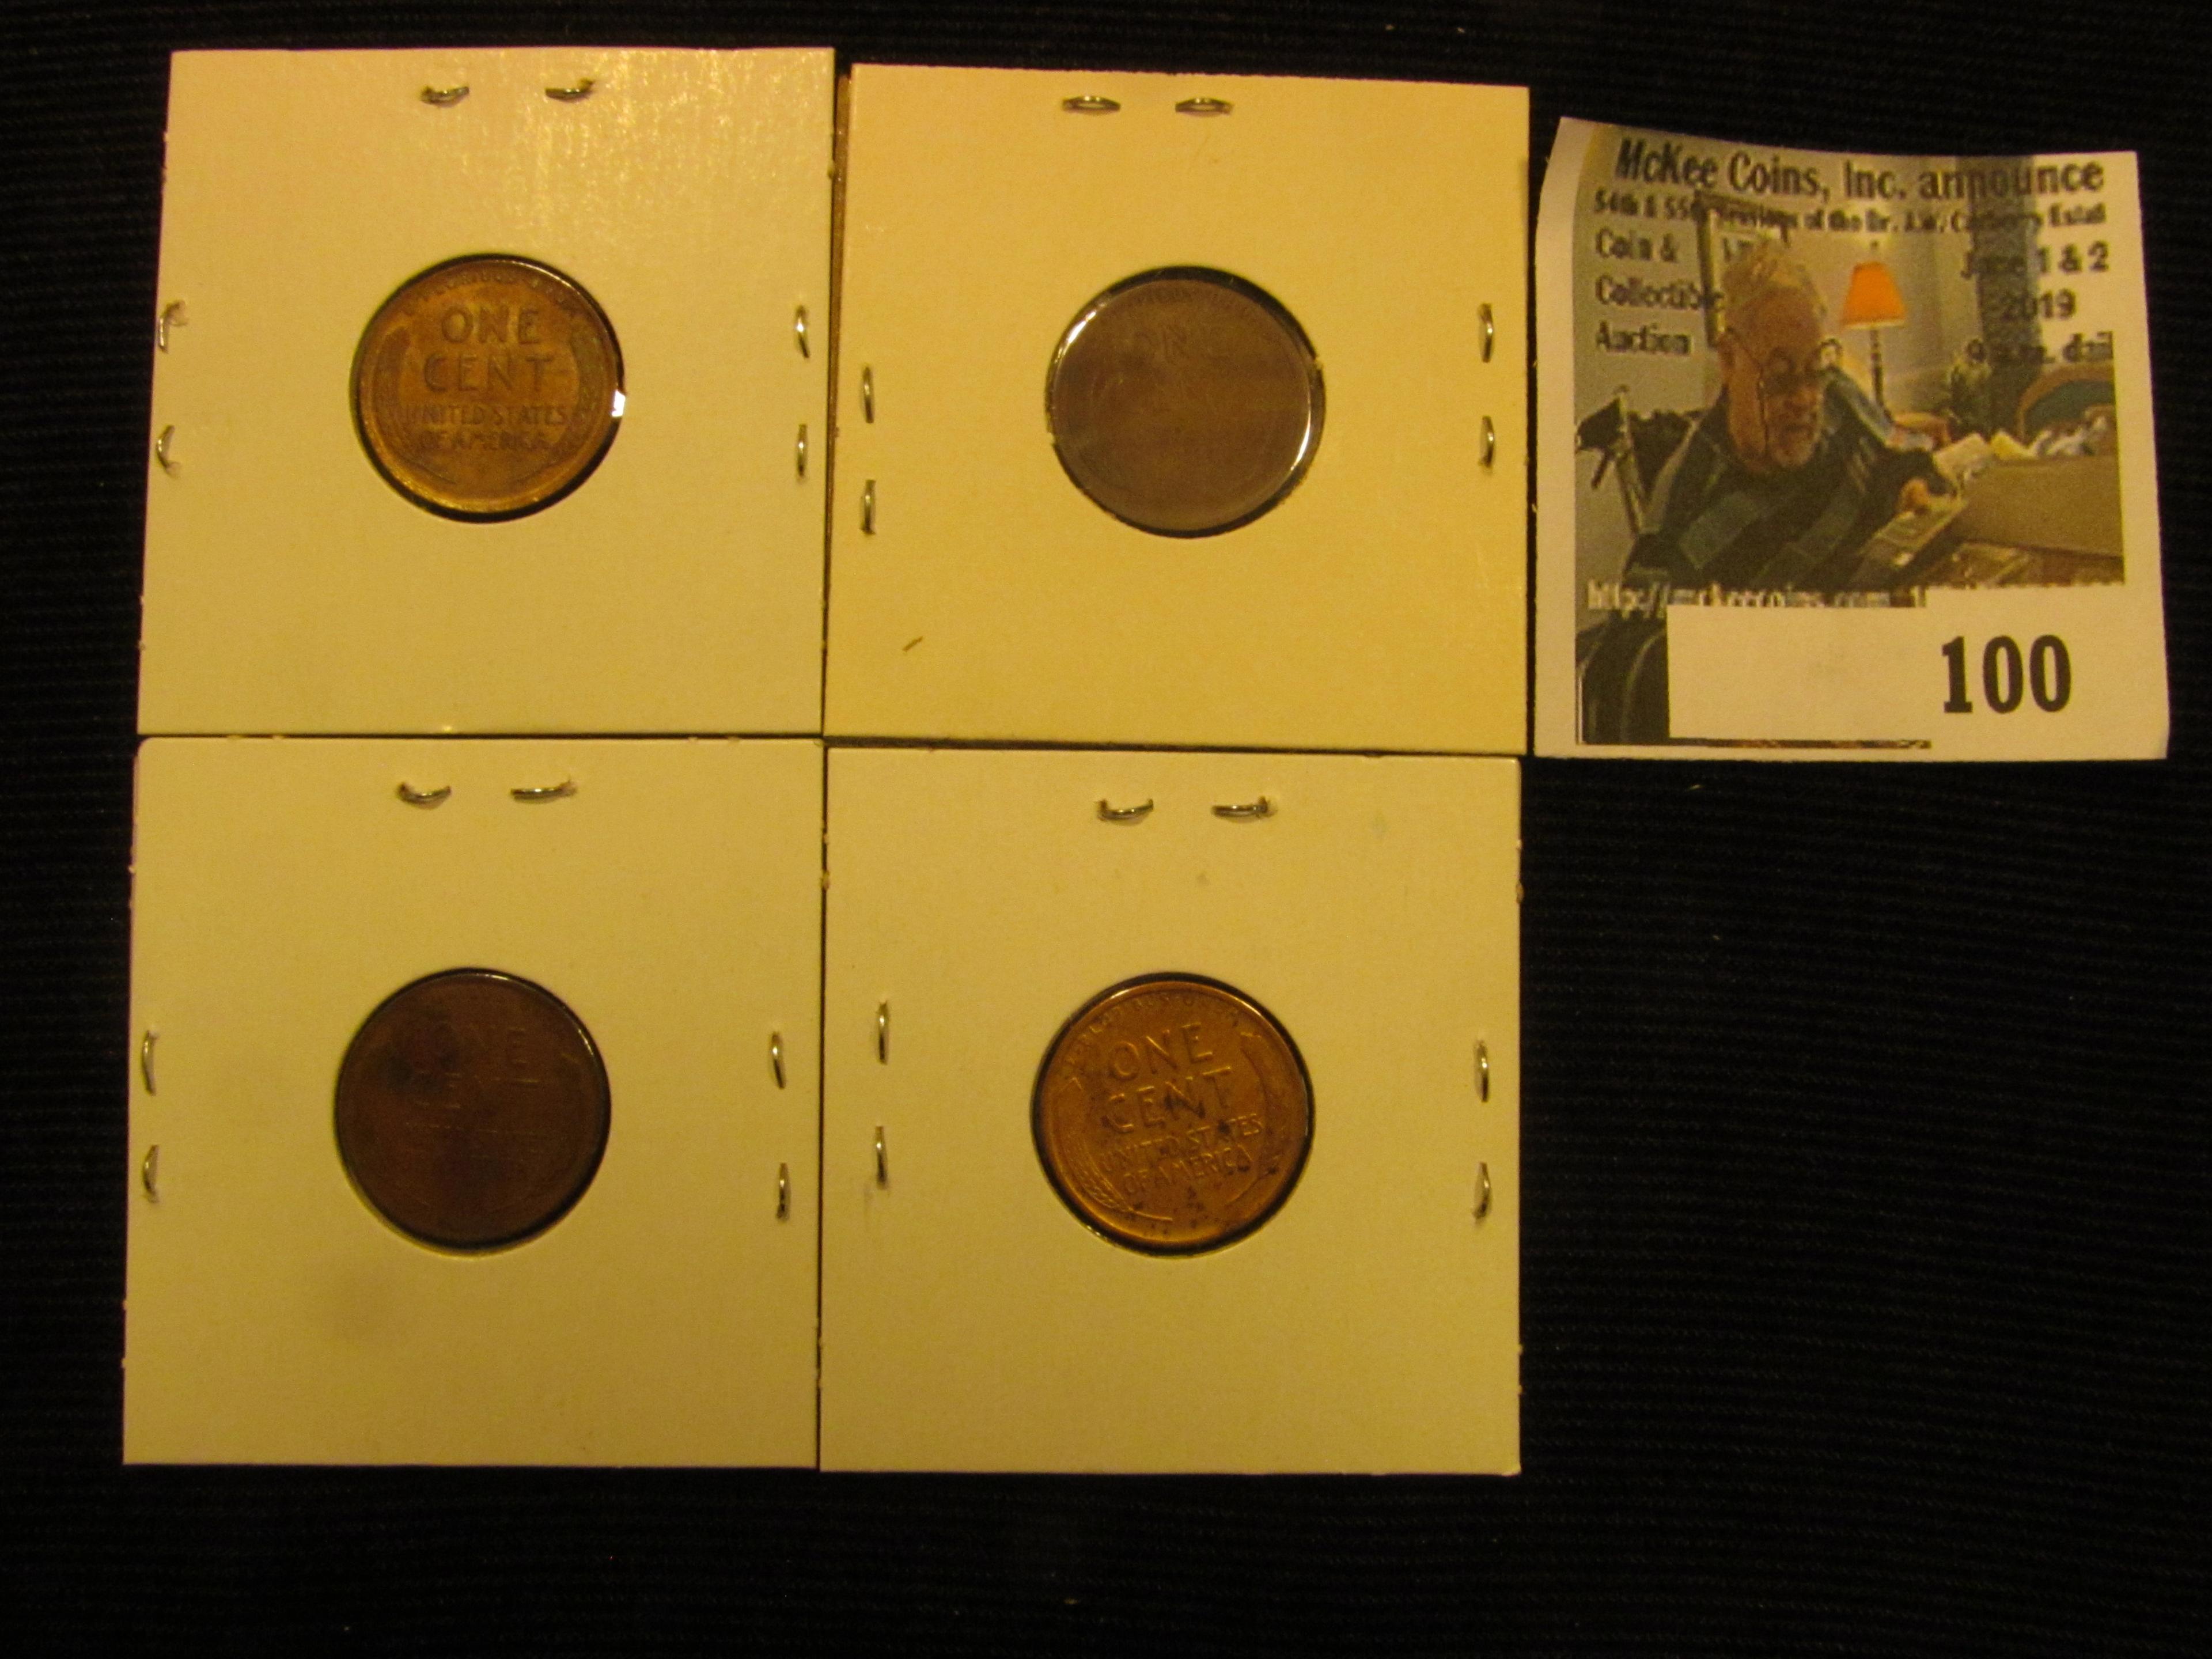 1910 P VF, 10 S Very Good, 11P VF, & 11D VG Lincoln Cents.